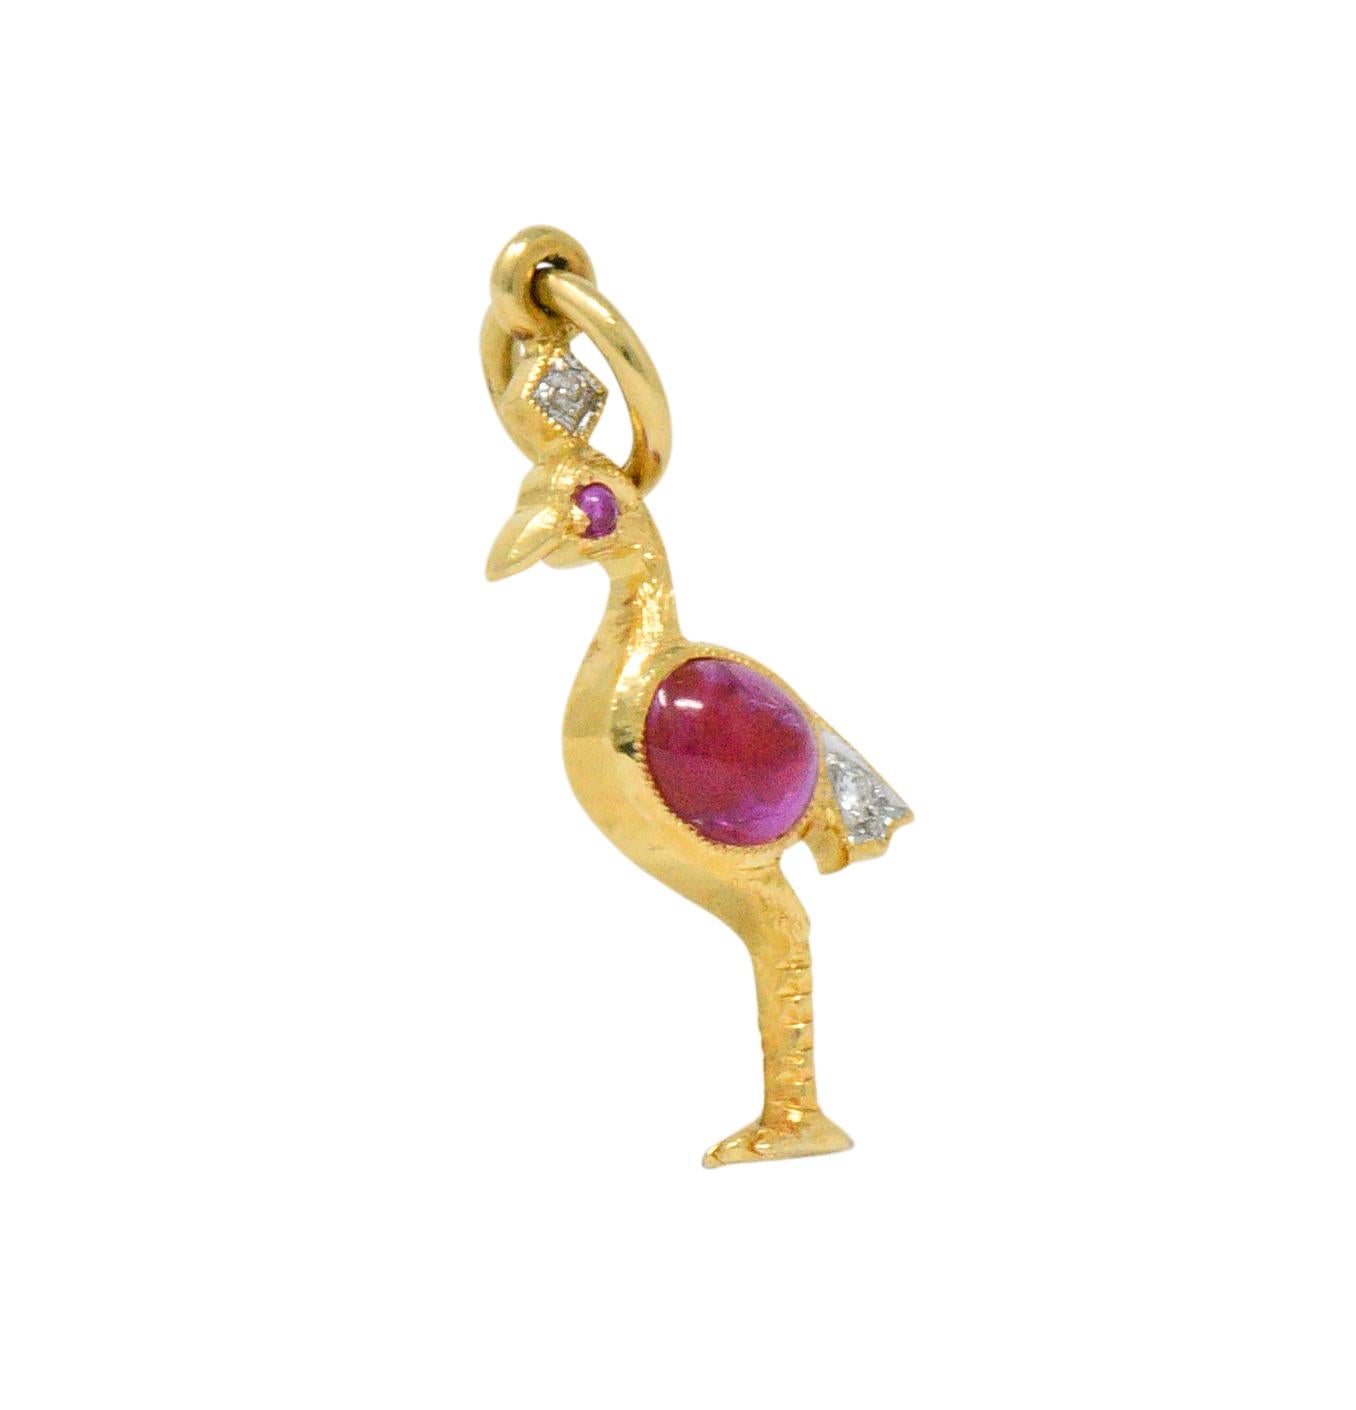 Designed as a flamingo centering an oval cabochon ruby

Accented by two round brilliant cut diamonds and tiny cabochon ruby eye

Tested as 18 karat gold

Measures: 3/8 x 1 Inch

Total Weight: 1.3 Grams

Tropical. Pink. Fun.  
 


Stock Number:We-